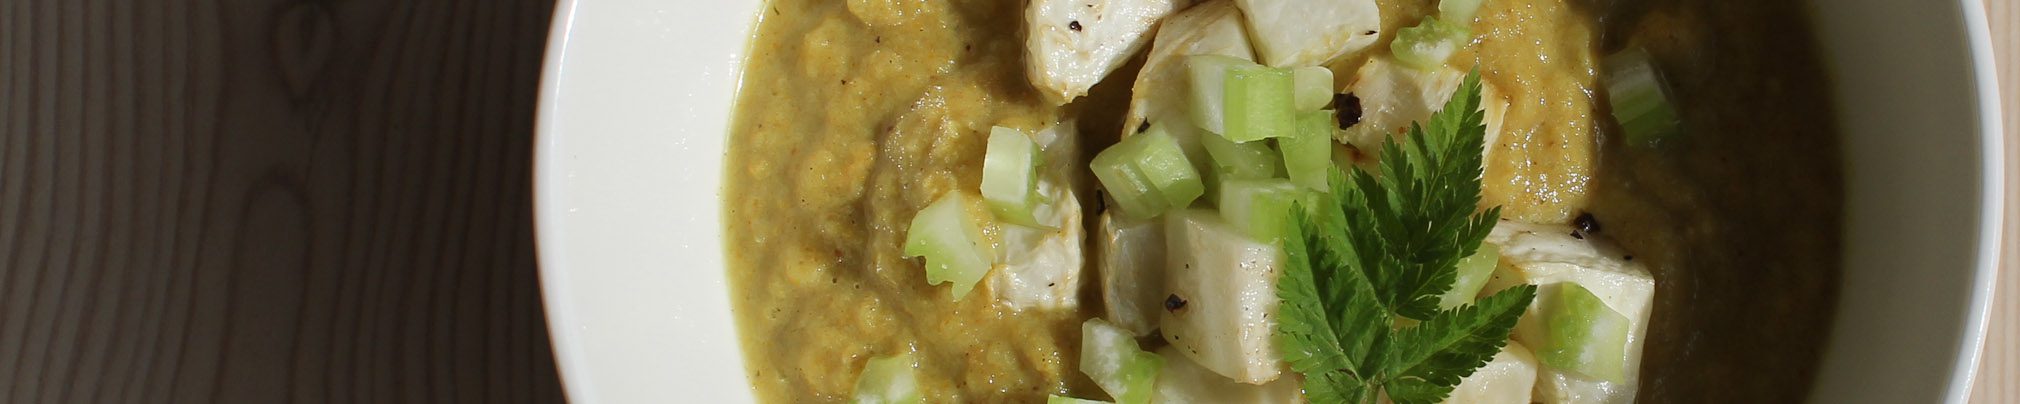 Apple and celeriac compote with curry